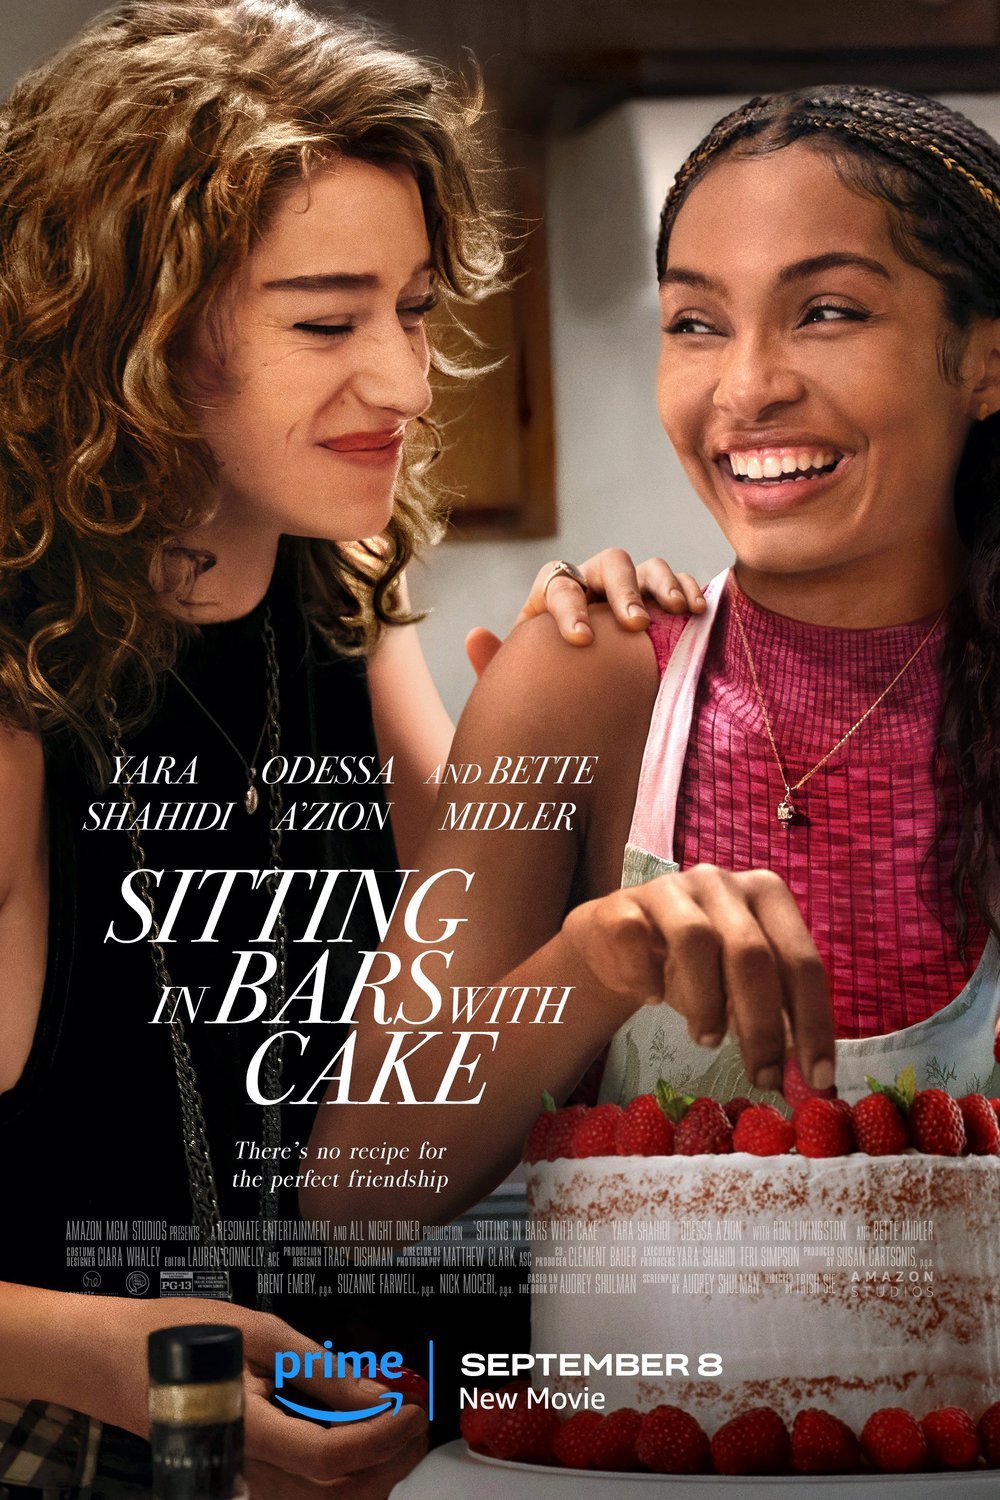 L'affiche du film Sitting in Bars with Cake